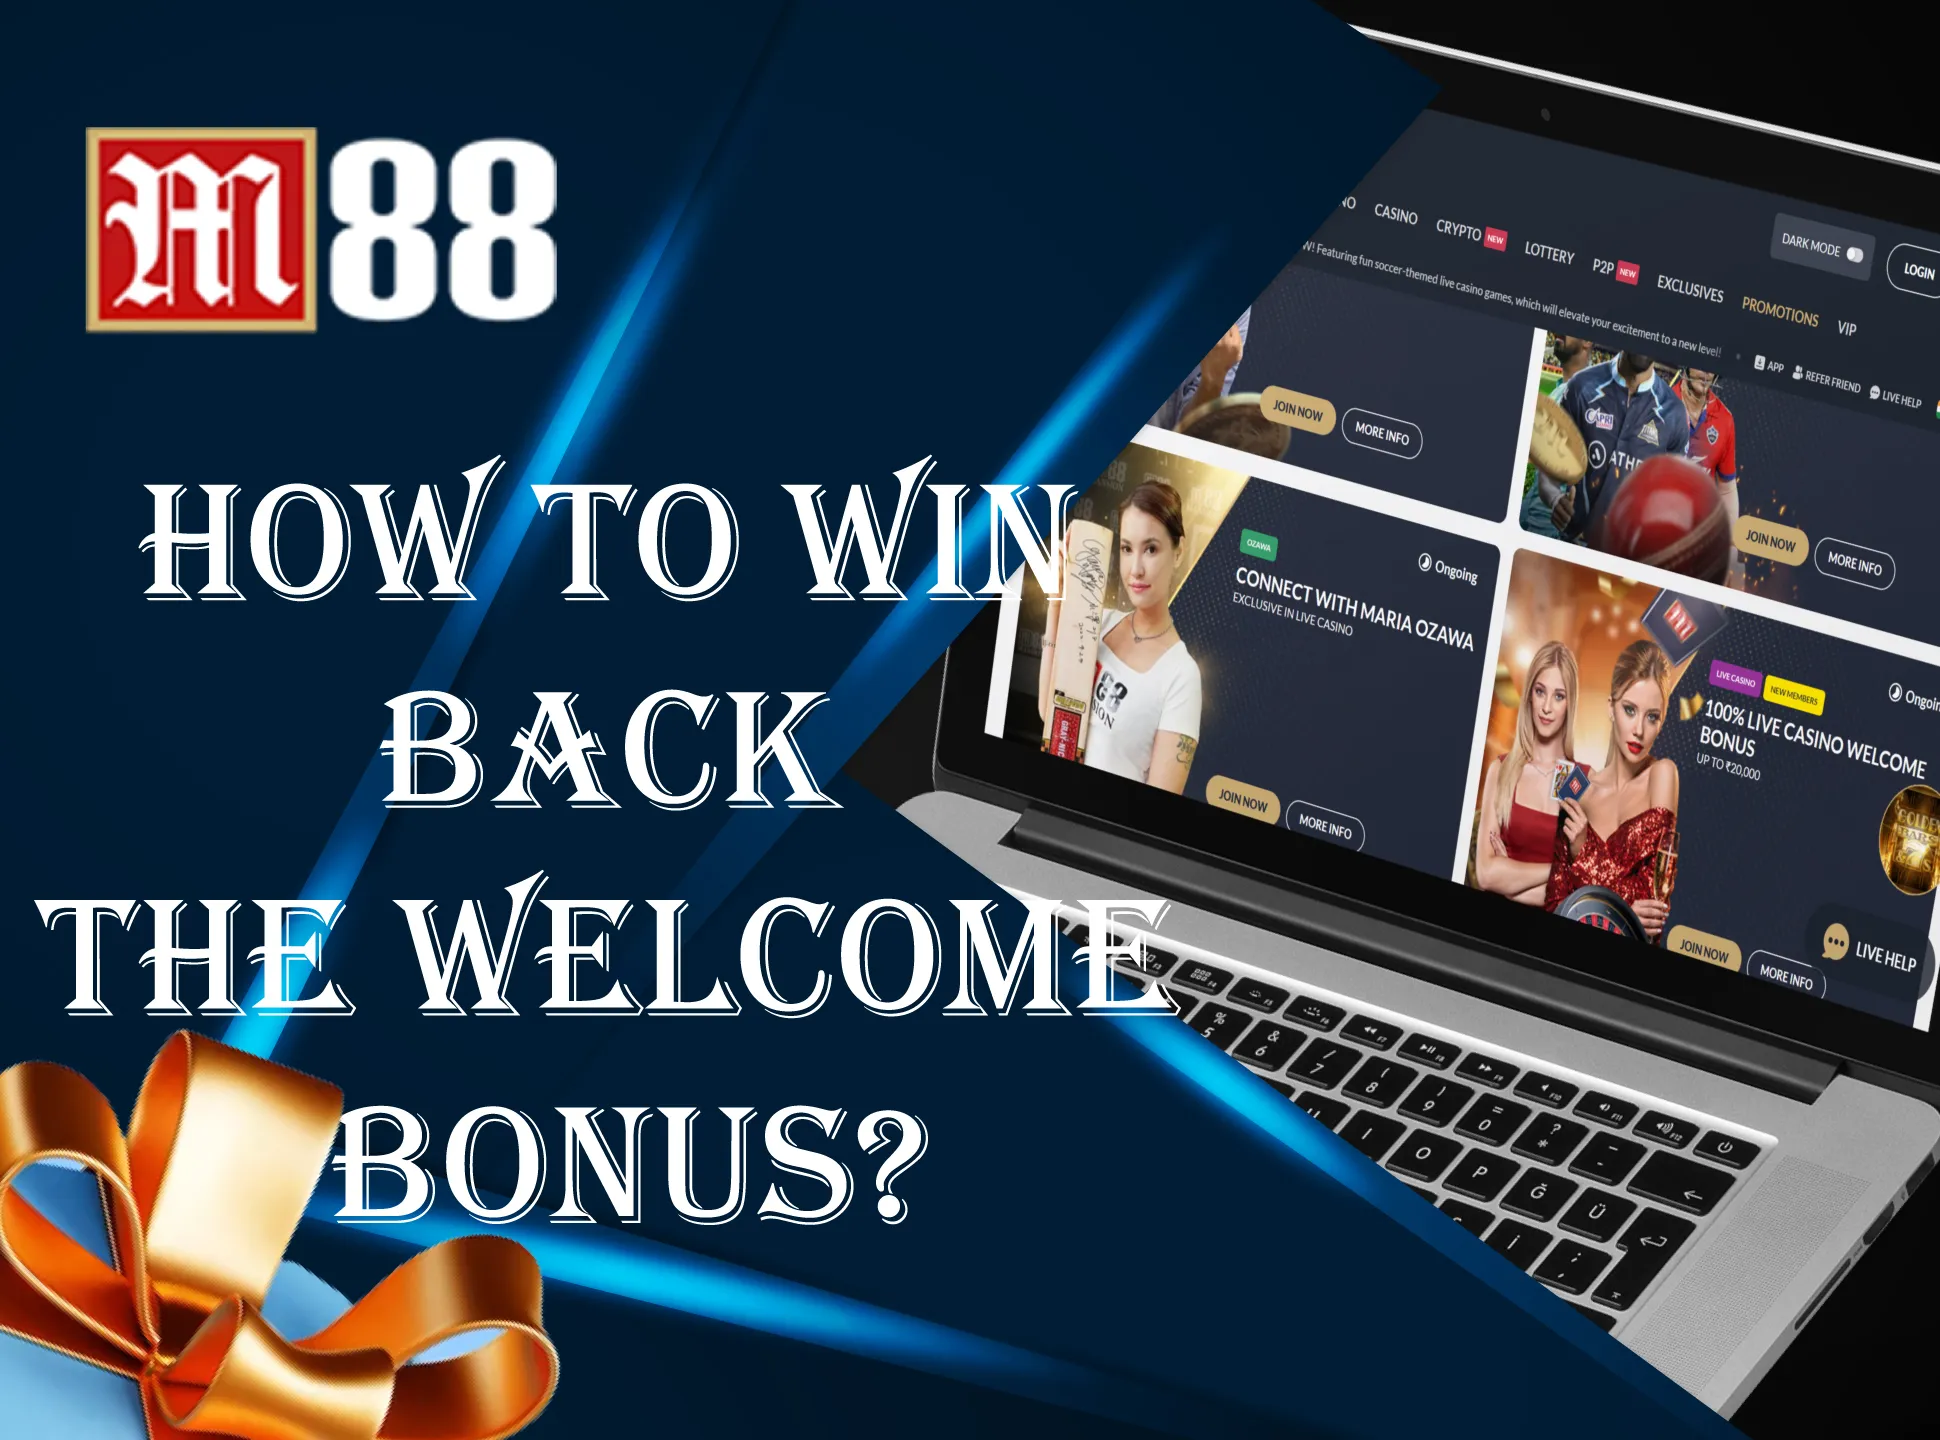 Win M88 welcome bonus by making bets.